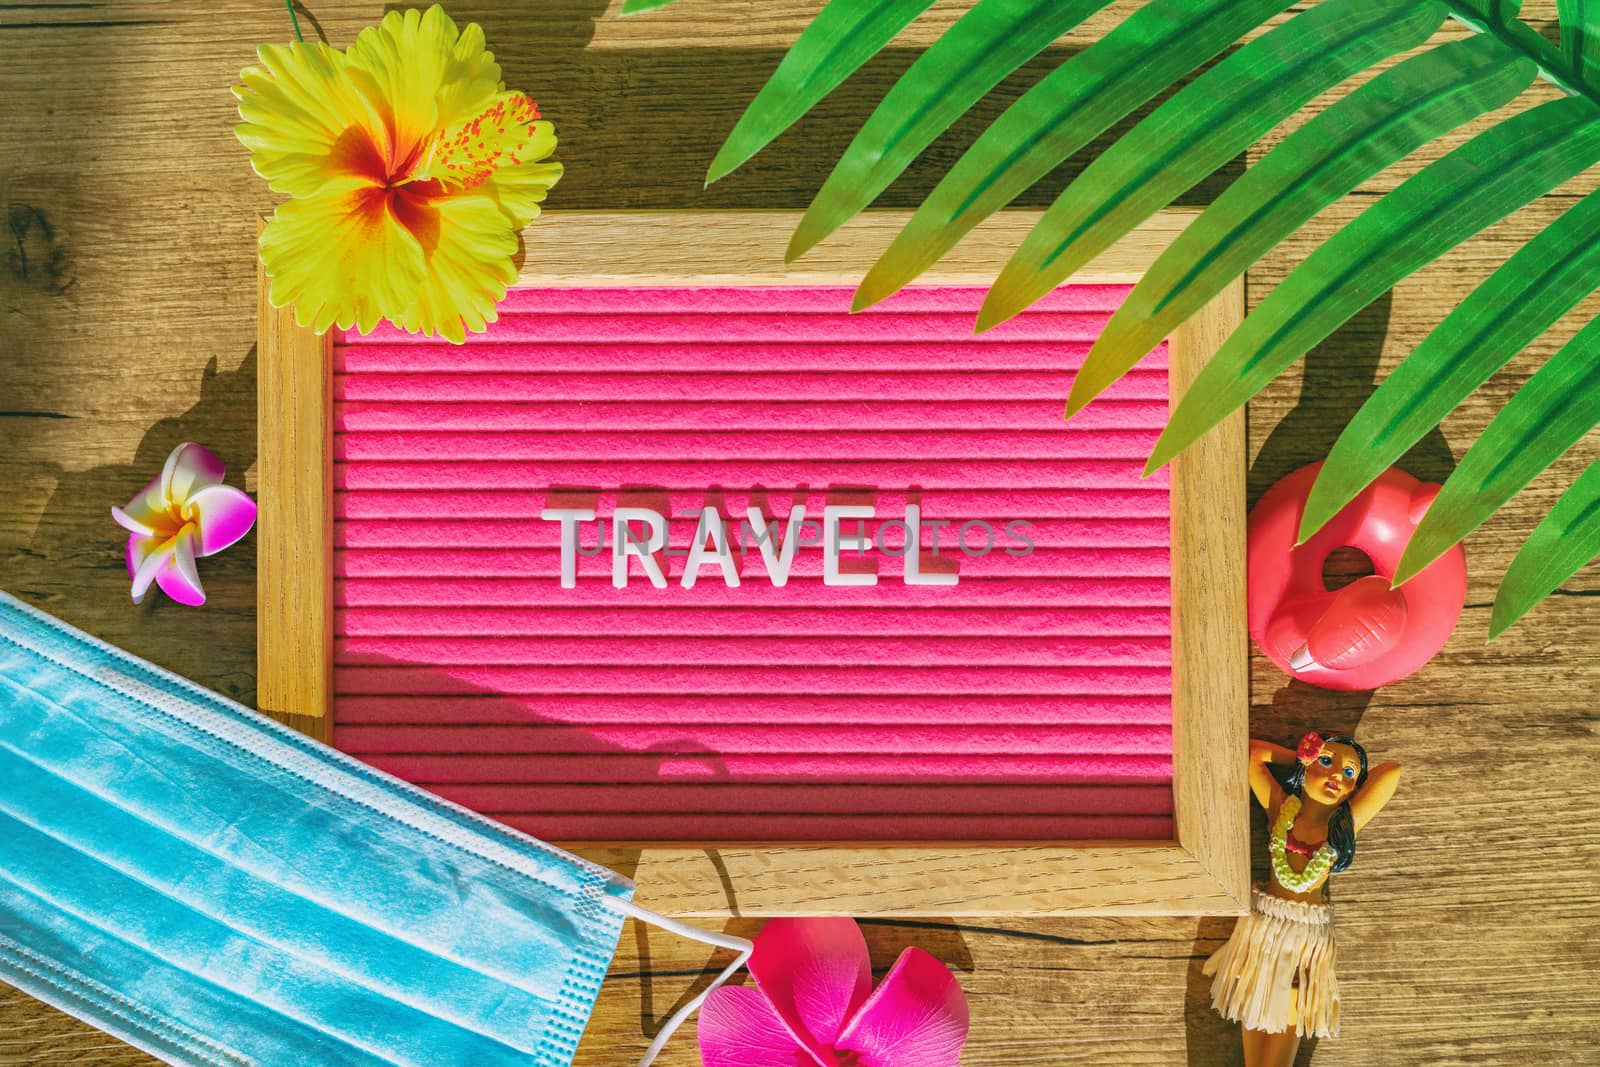 TRAVEL tropical sign with medical face mask for new reality after coronavirus pandemic. Funny pink felt board with text and flowers, hula doll, surgical mandatory wearing by Maridav